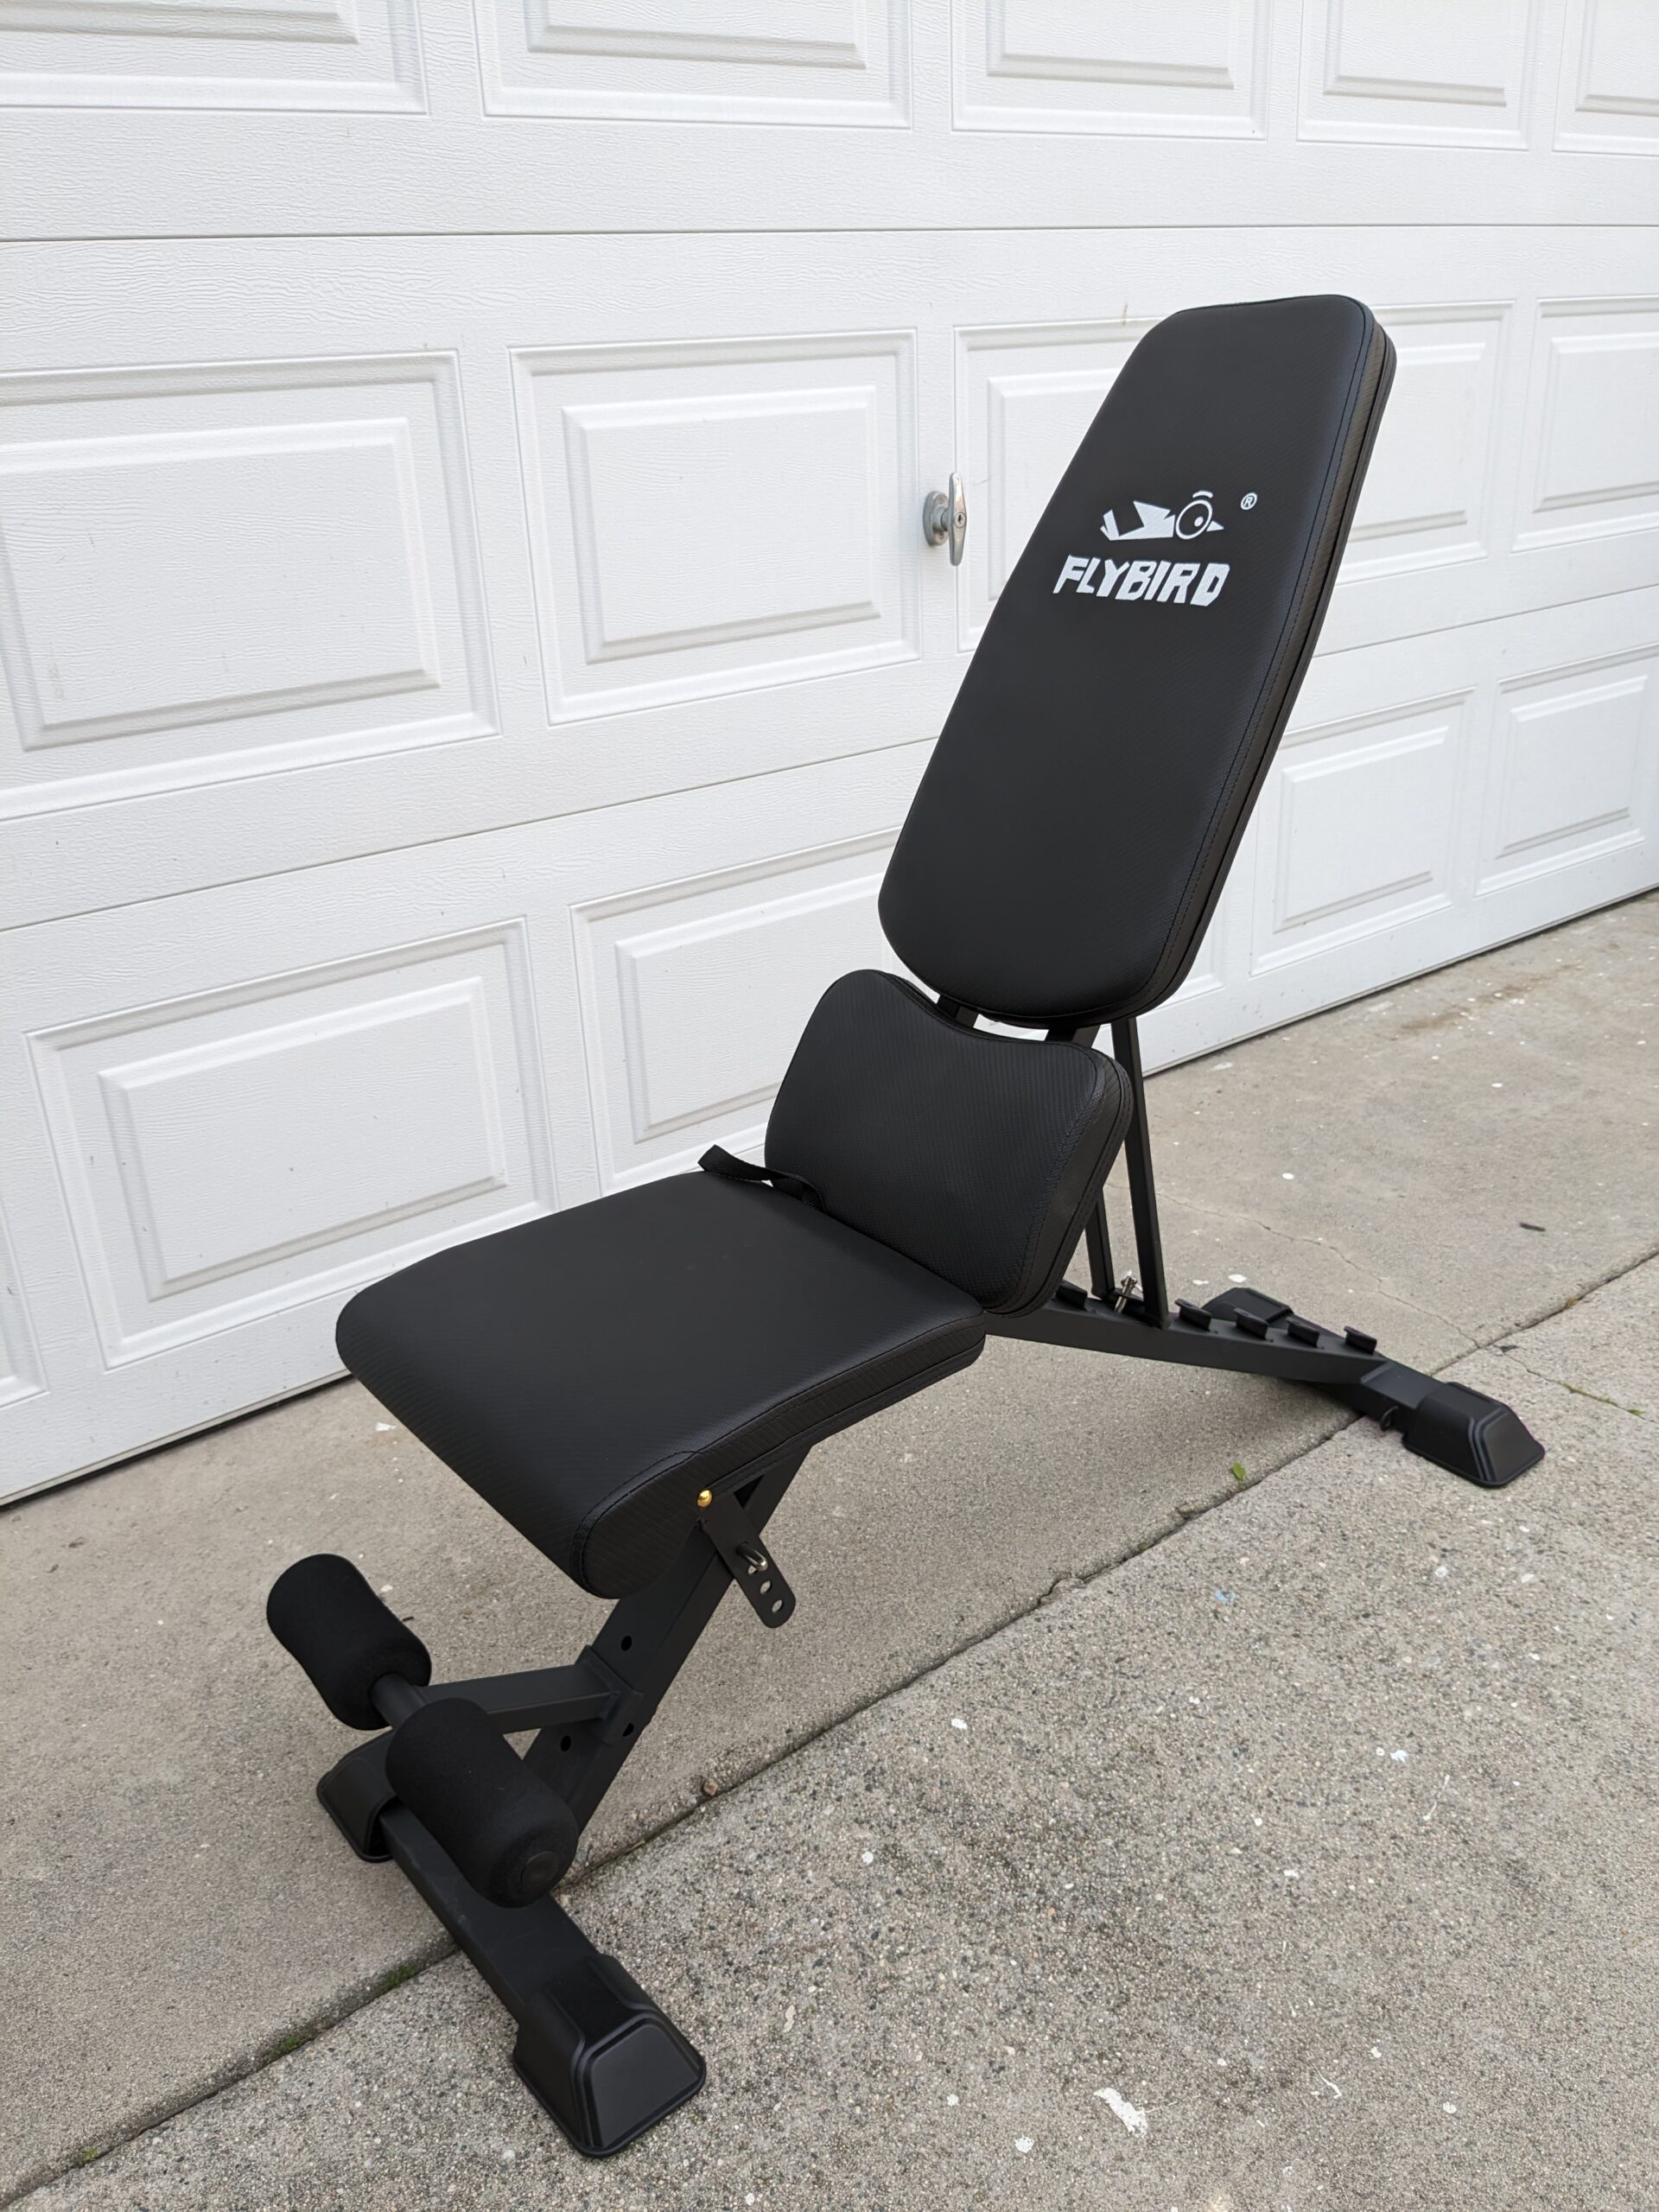 FLYBIRD Adjustable Weight Bench WP129 inclined